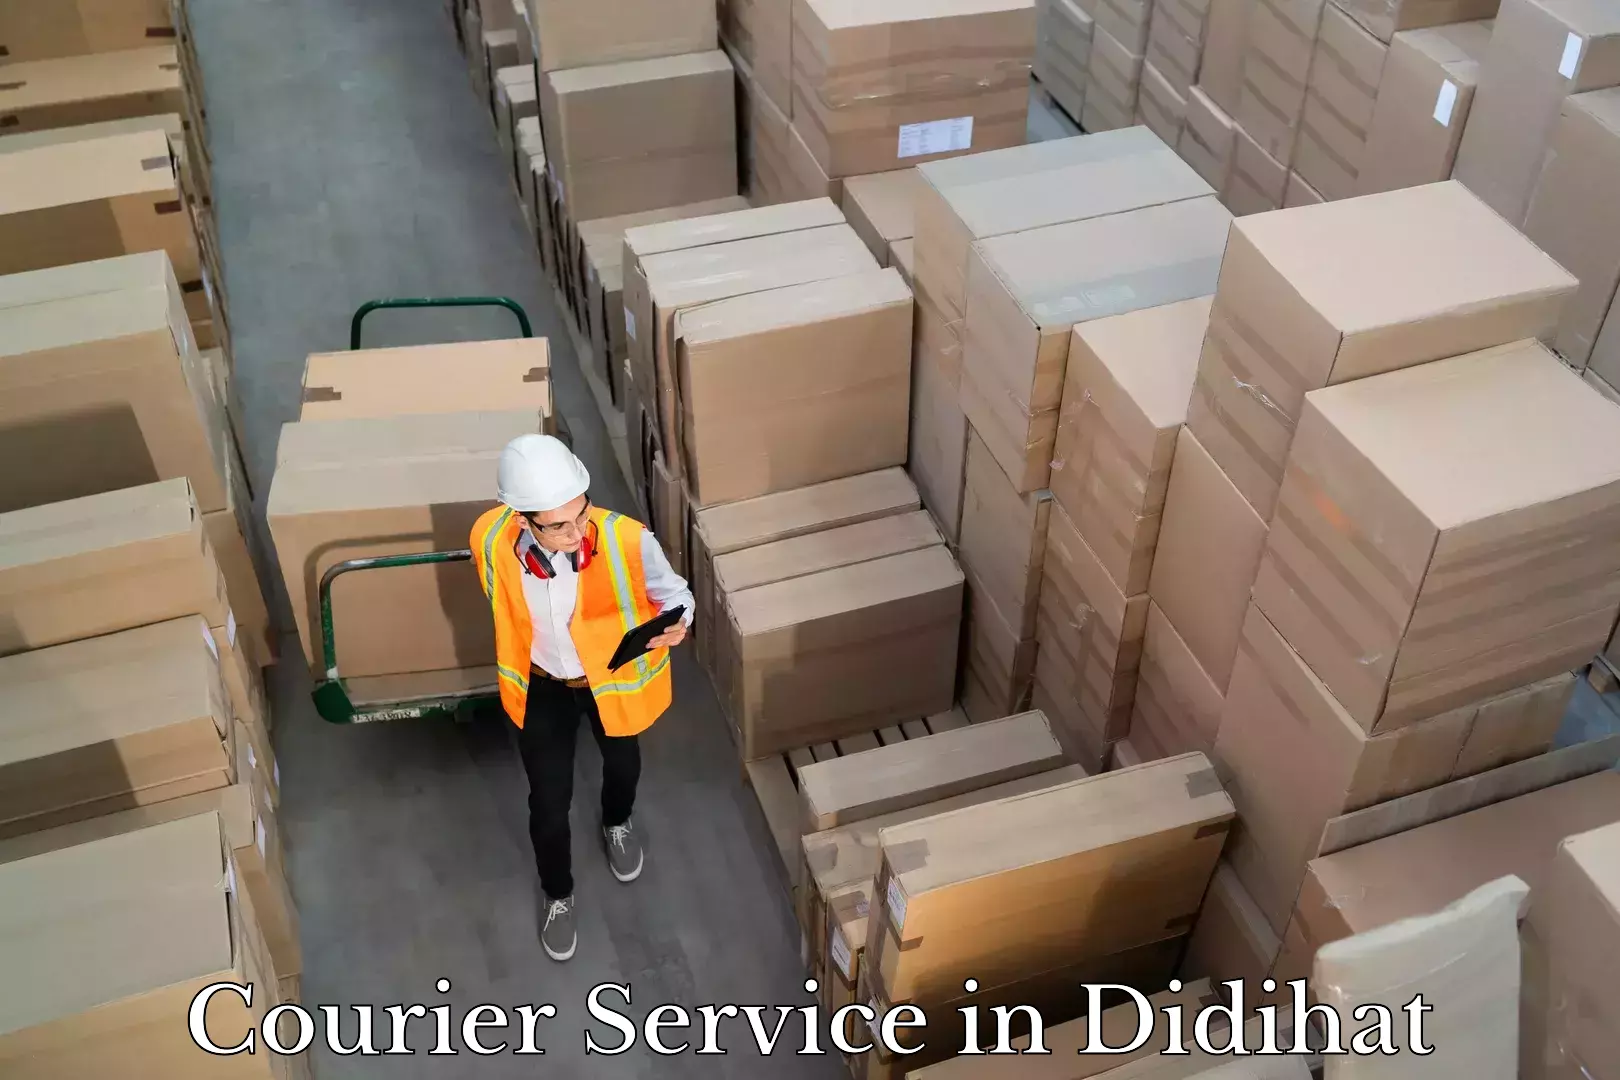 24-hour delivery options in Didihat